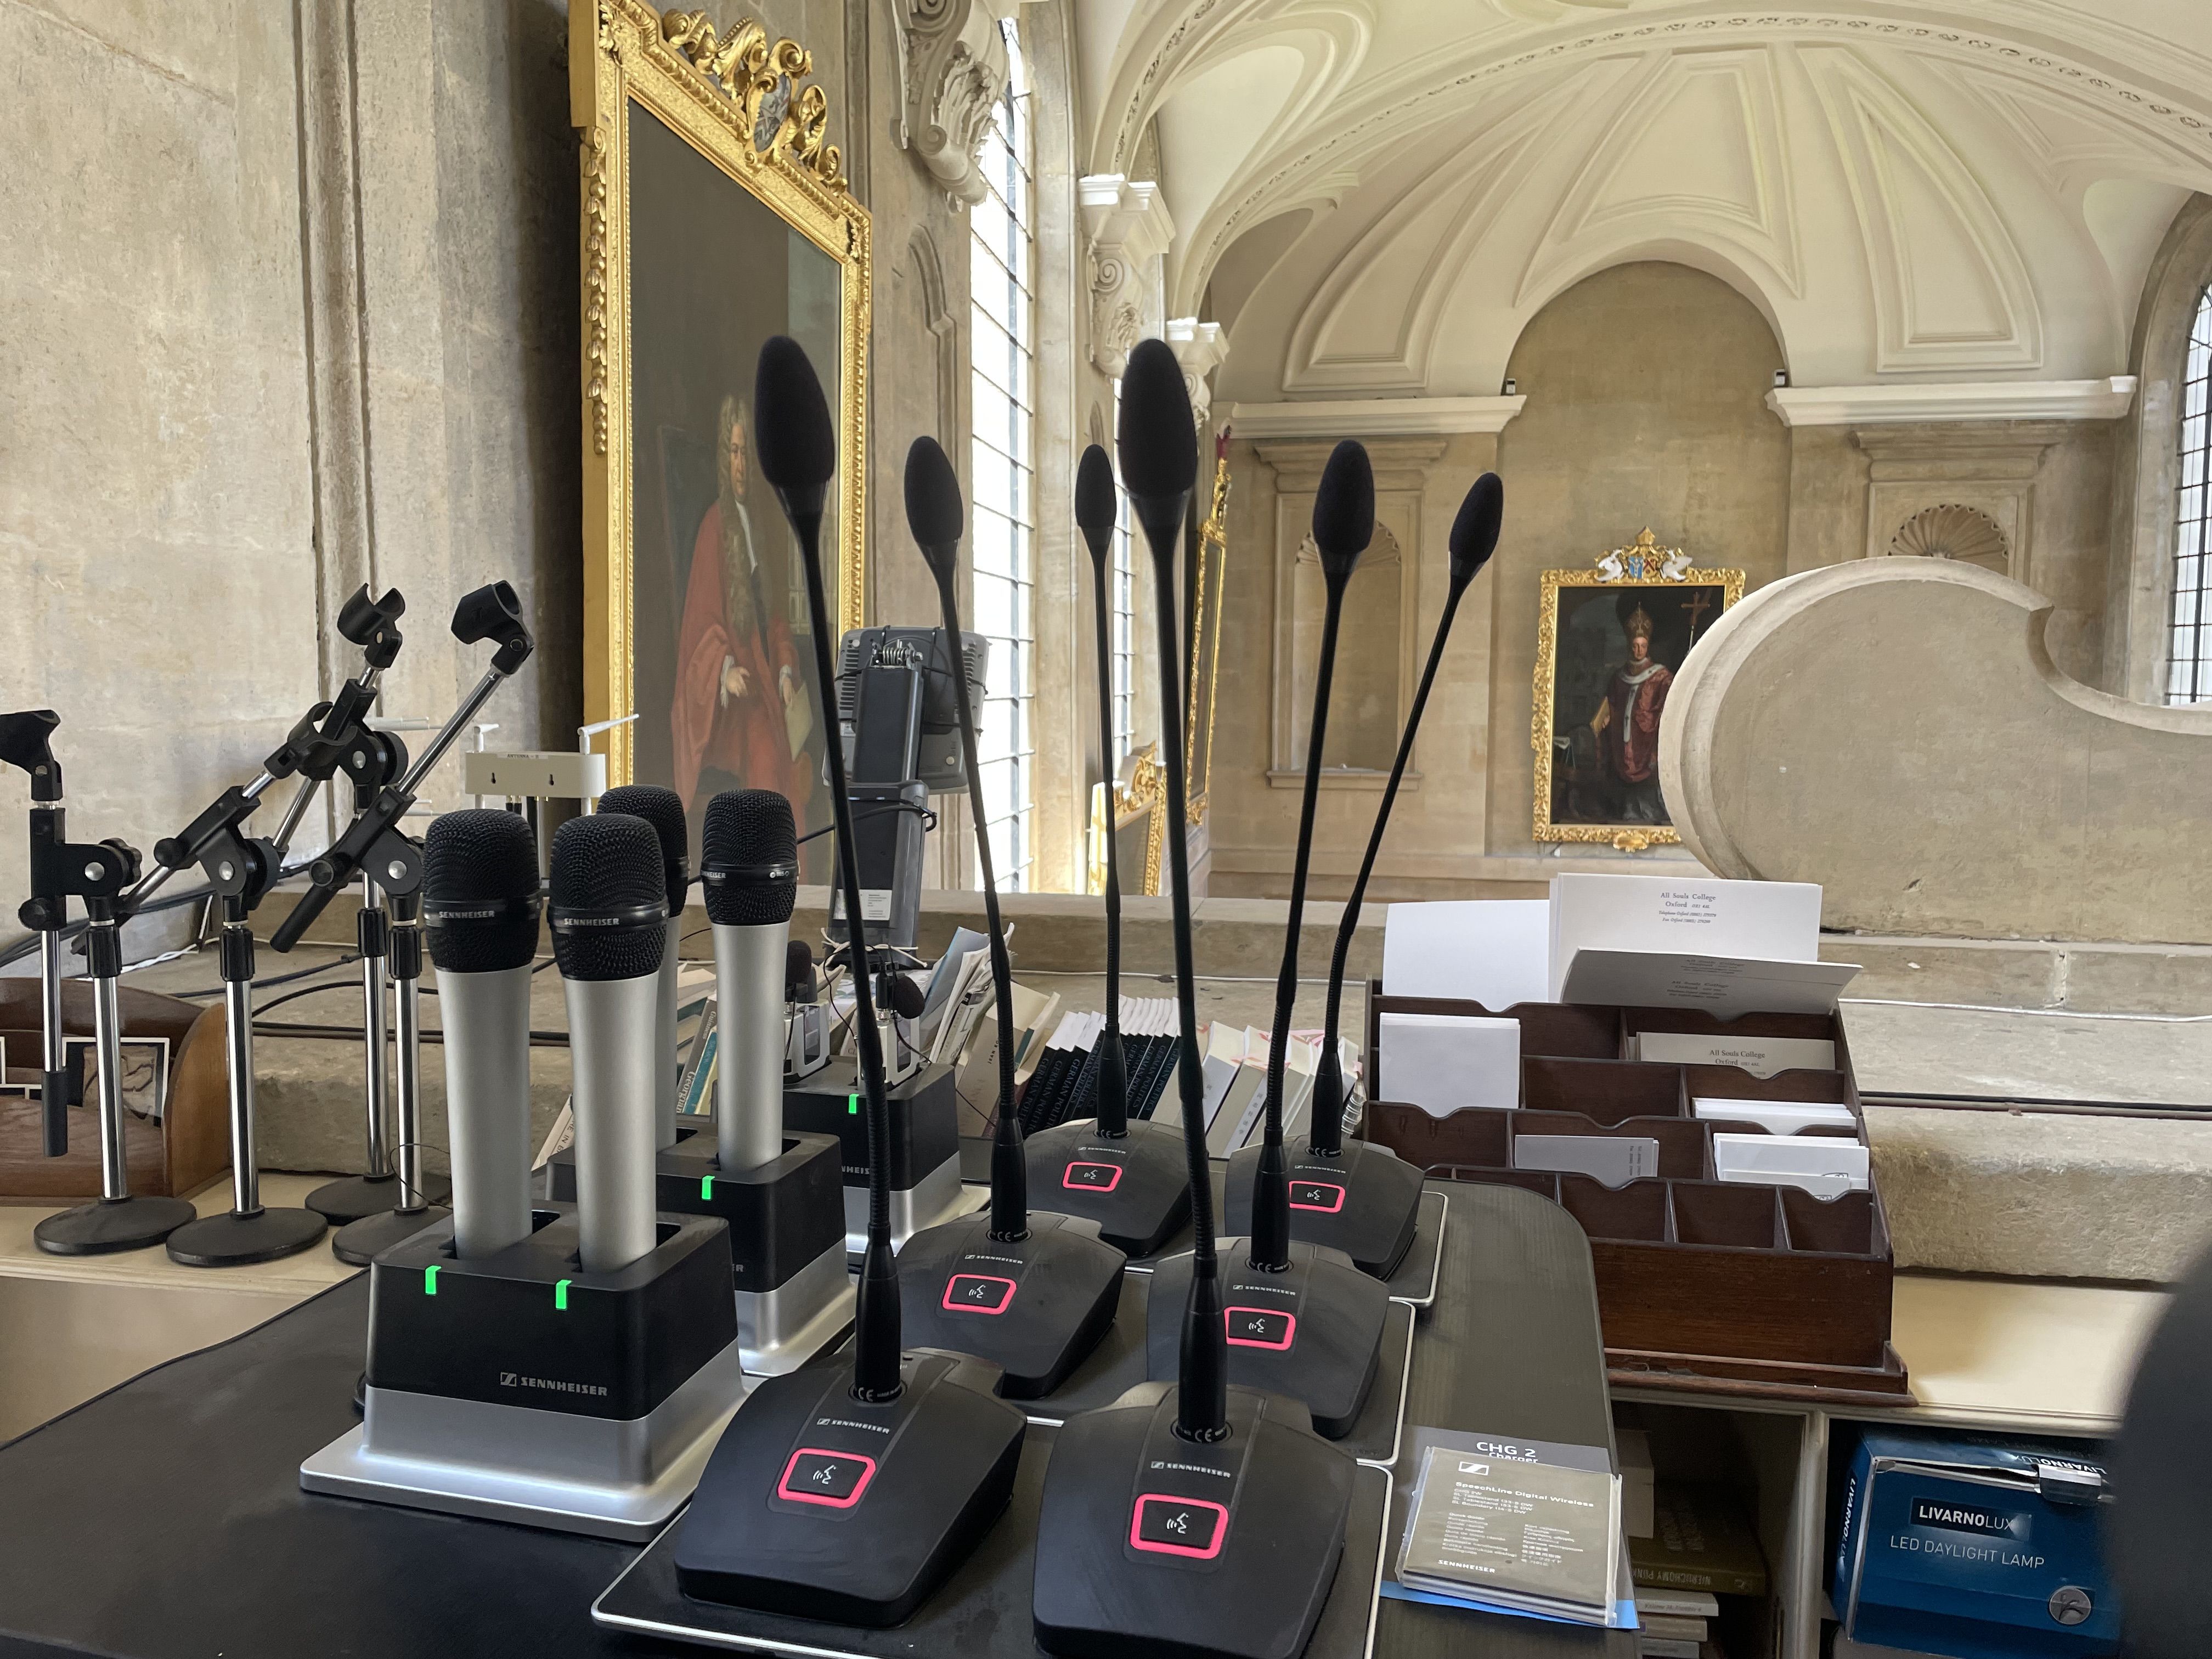 SpeechLine Digital Wireless (SLDW) microphone system selected by the prestigious All Souls College to enhance audio in one of the college’s oldest, most unique meeting rooms